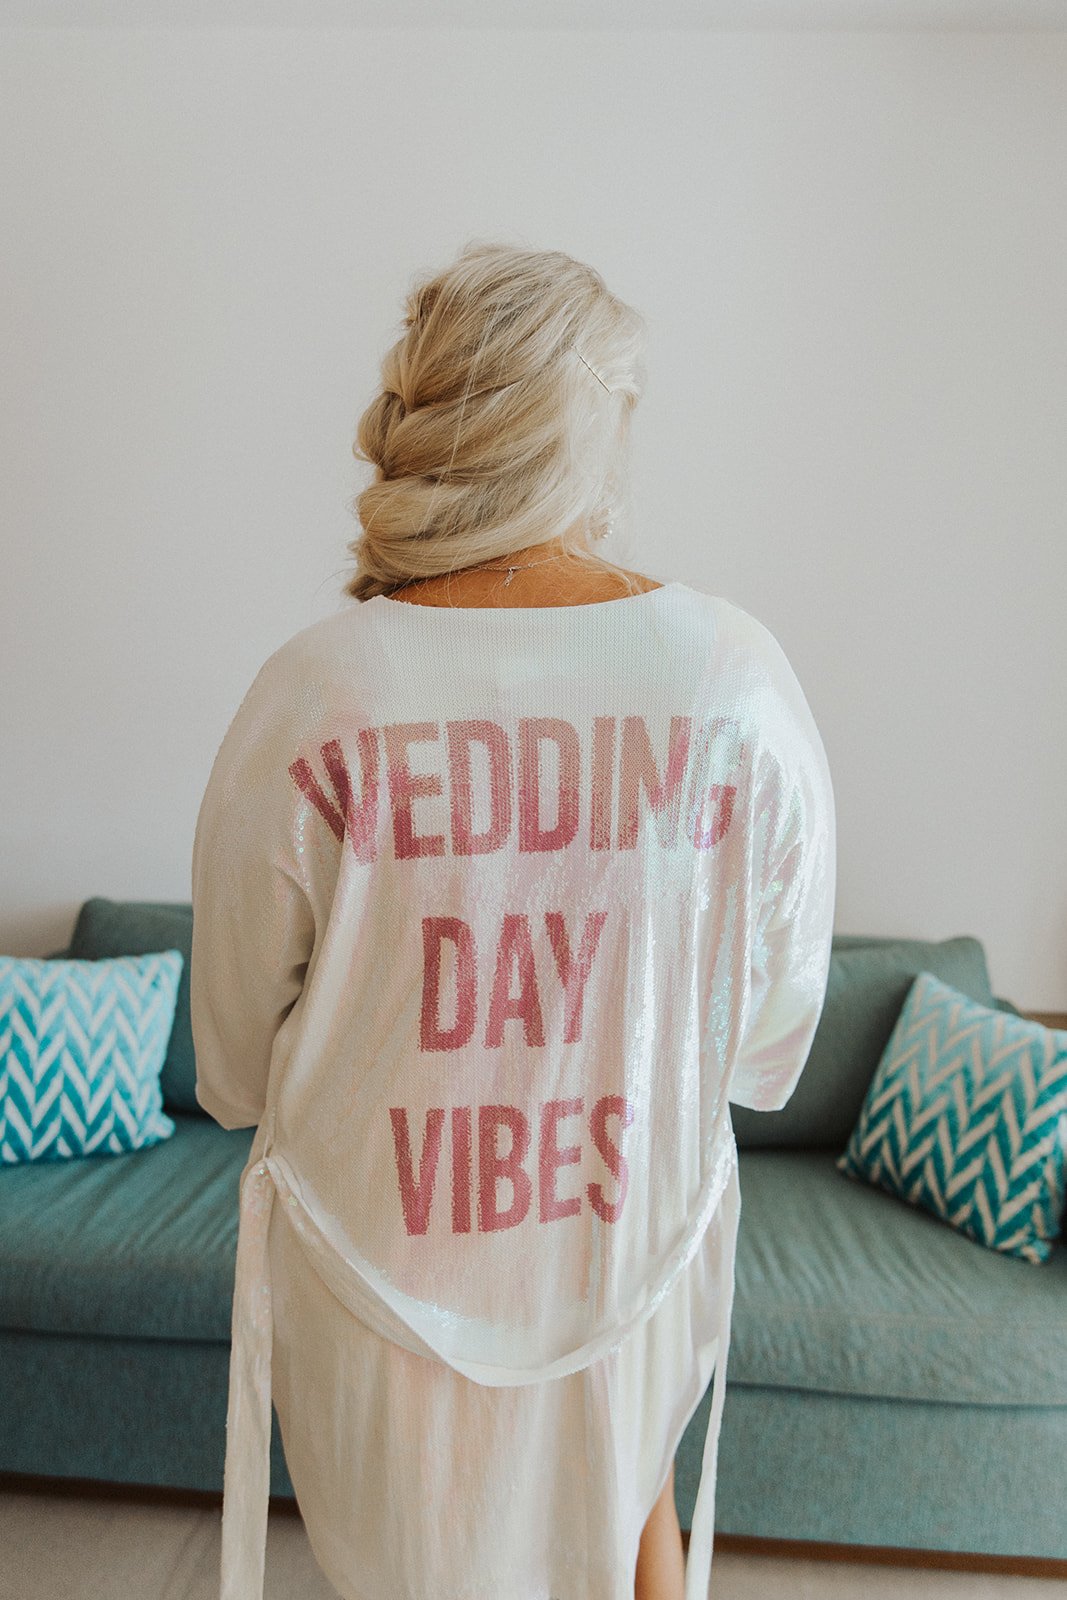  A bride wearing a white robe that says “wedding day vibes” in pink sequins on the back. 